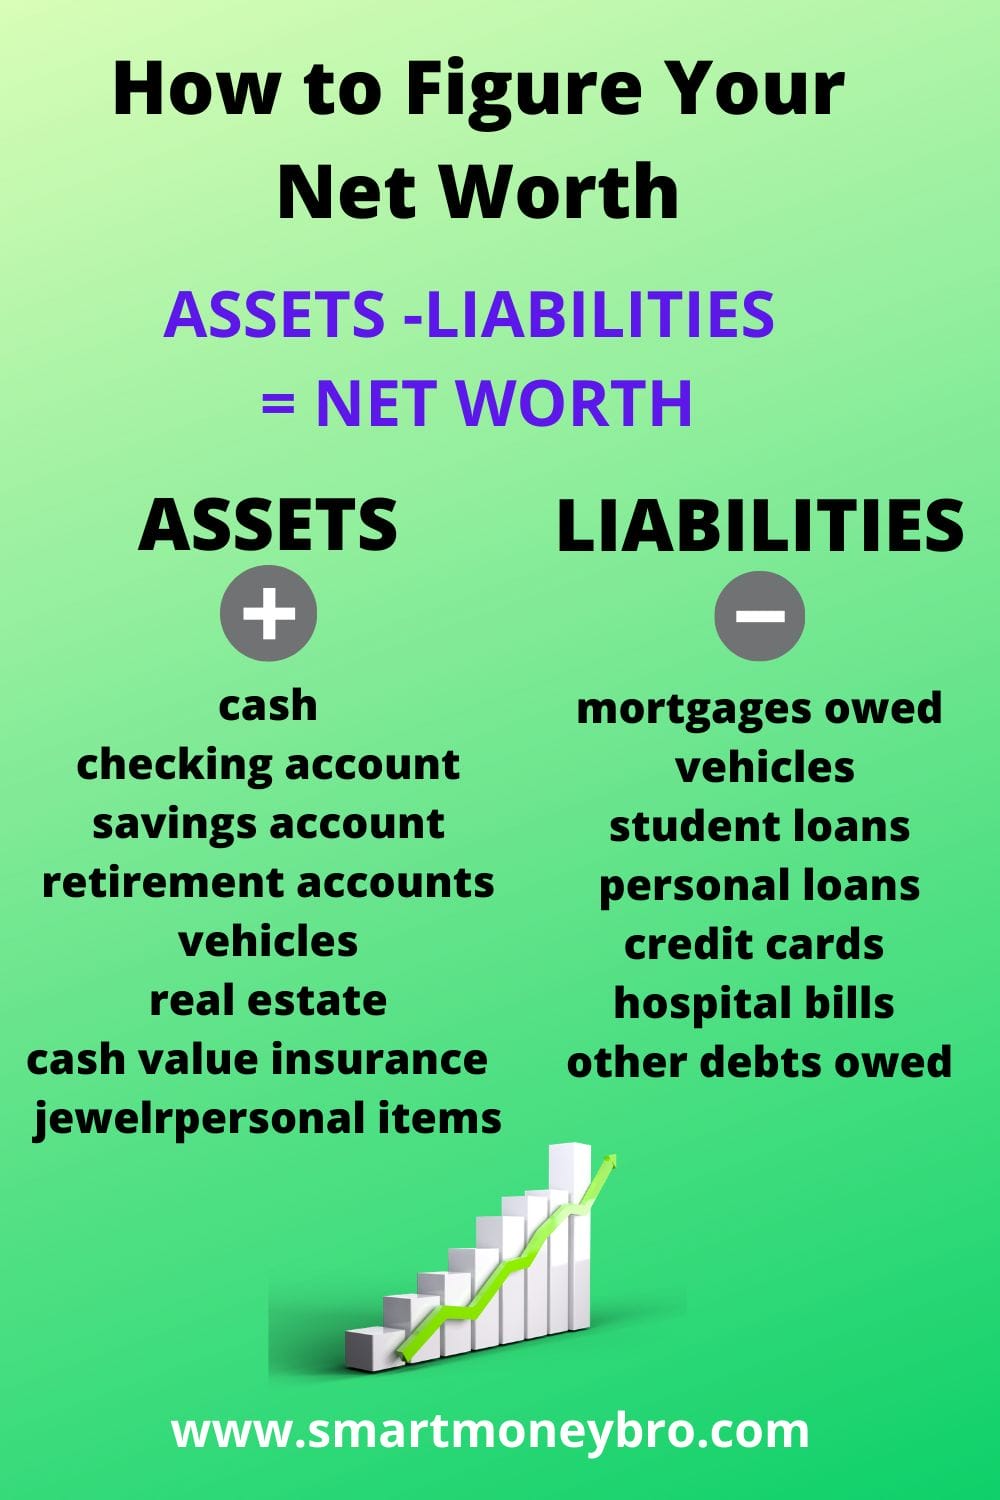 How to figure your net worth formula on green background